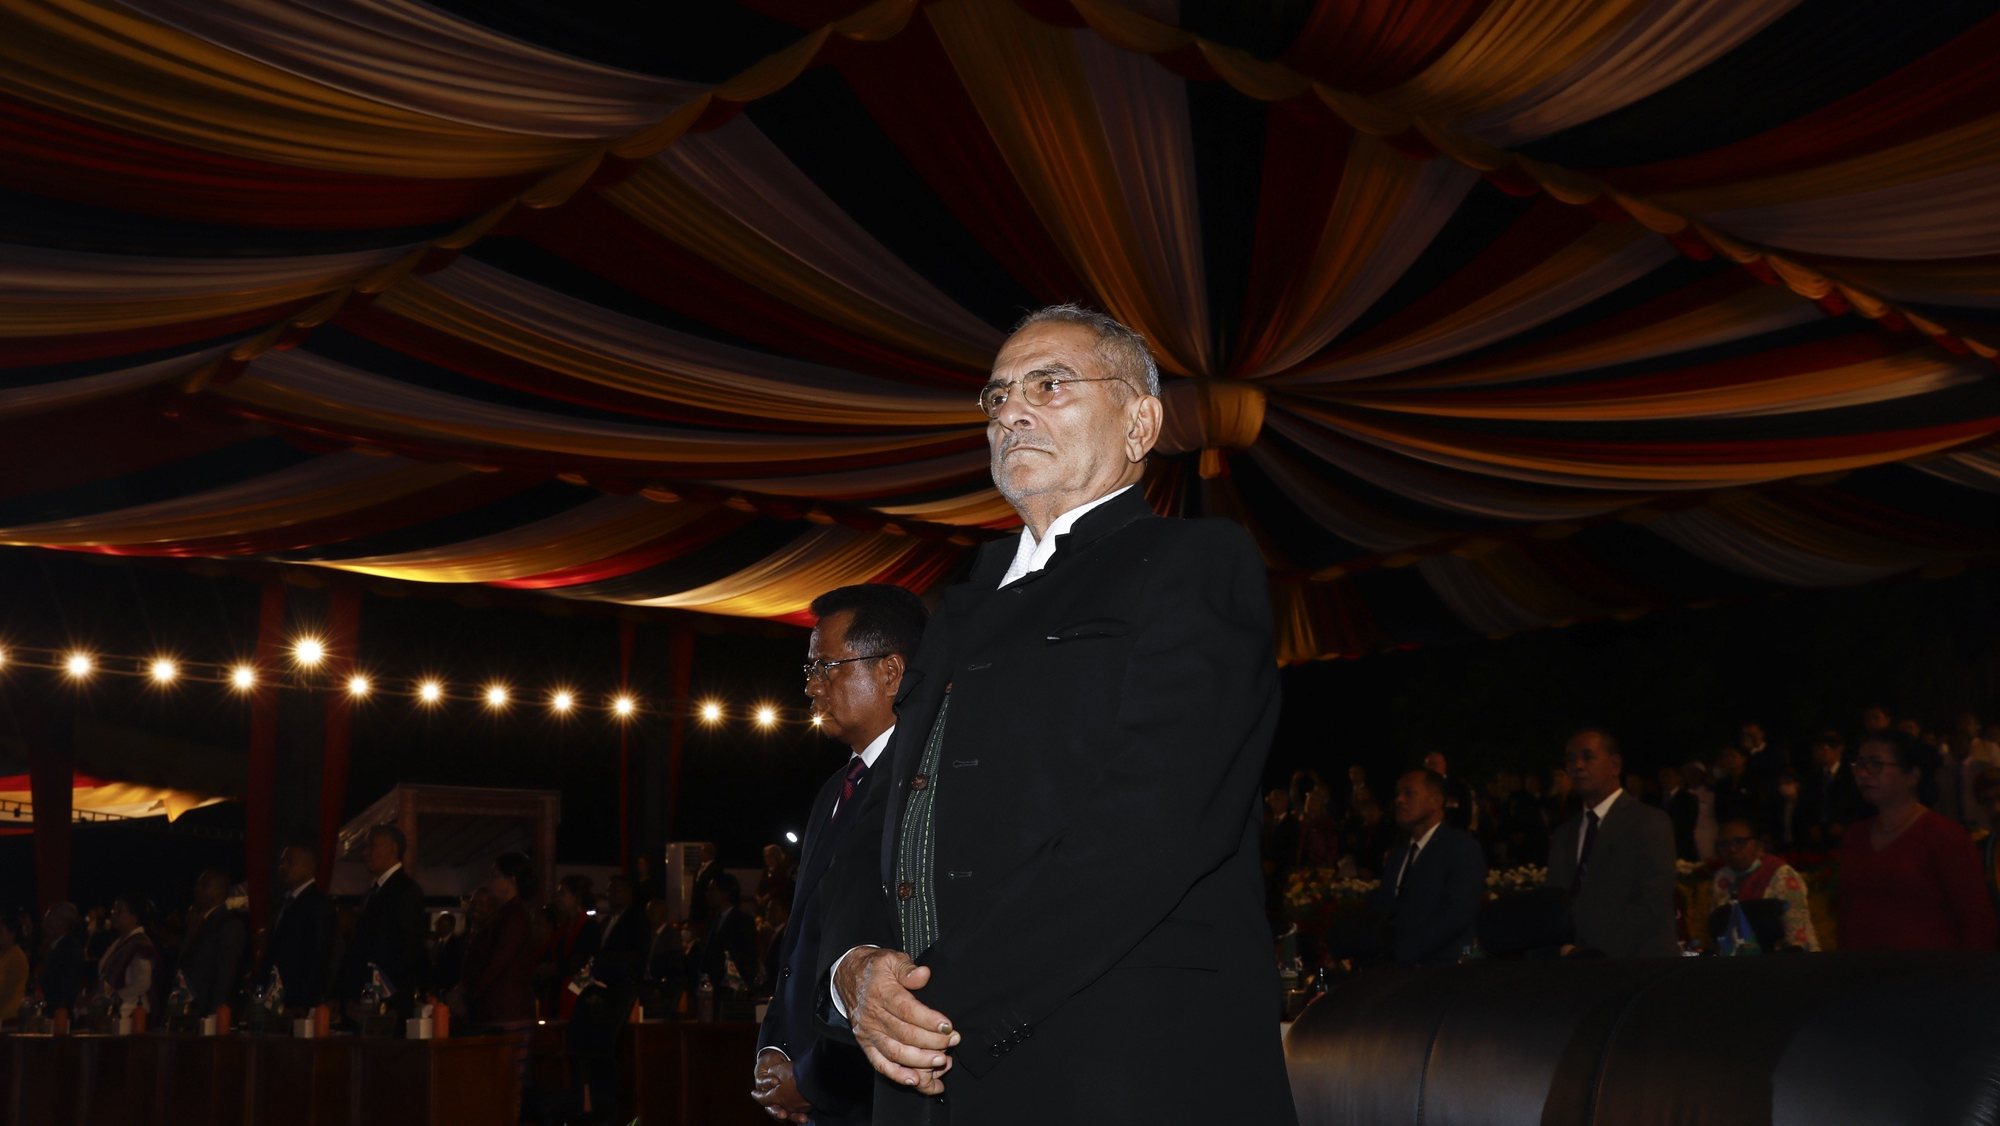 The new President of the Democratic Republic of Timor-Leste, Jose Ramos-Horta, during the swearing in ceremony, in Dili, Timor-Leste, 19 May 2022. ANTONIO COTRIM/LUSA